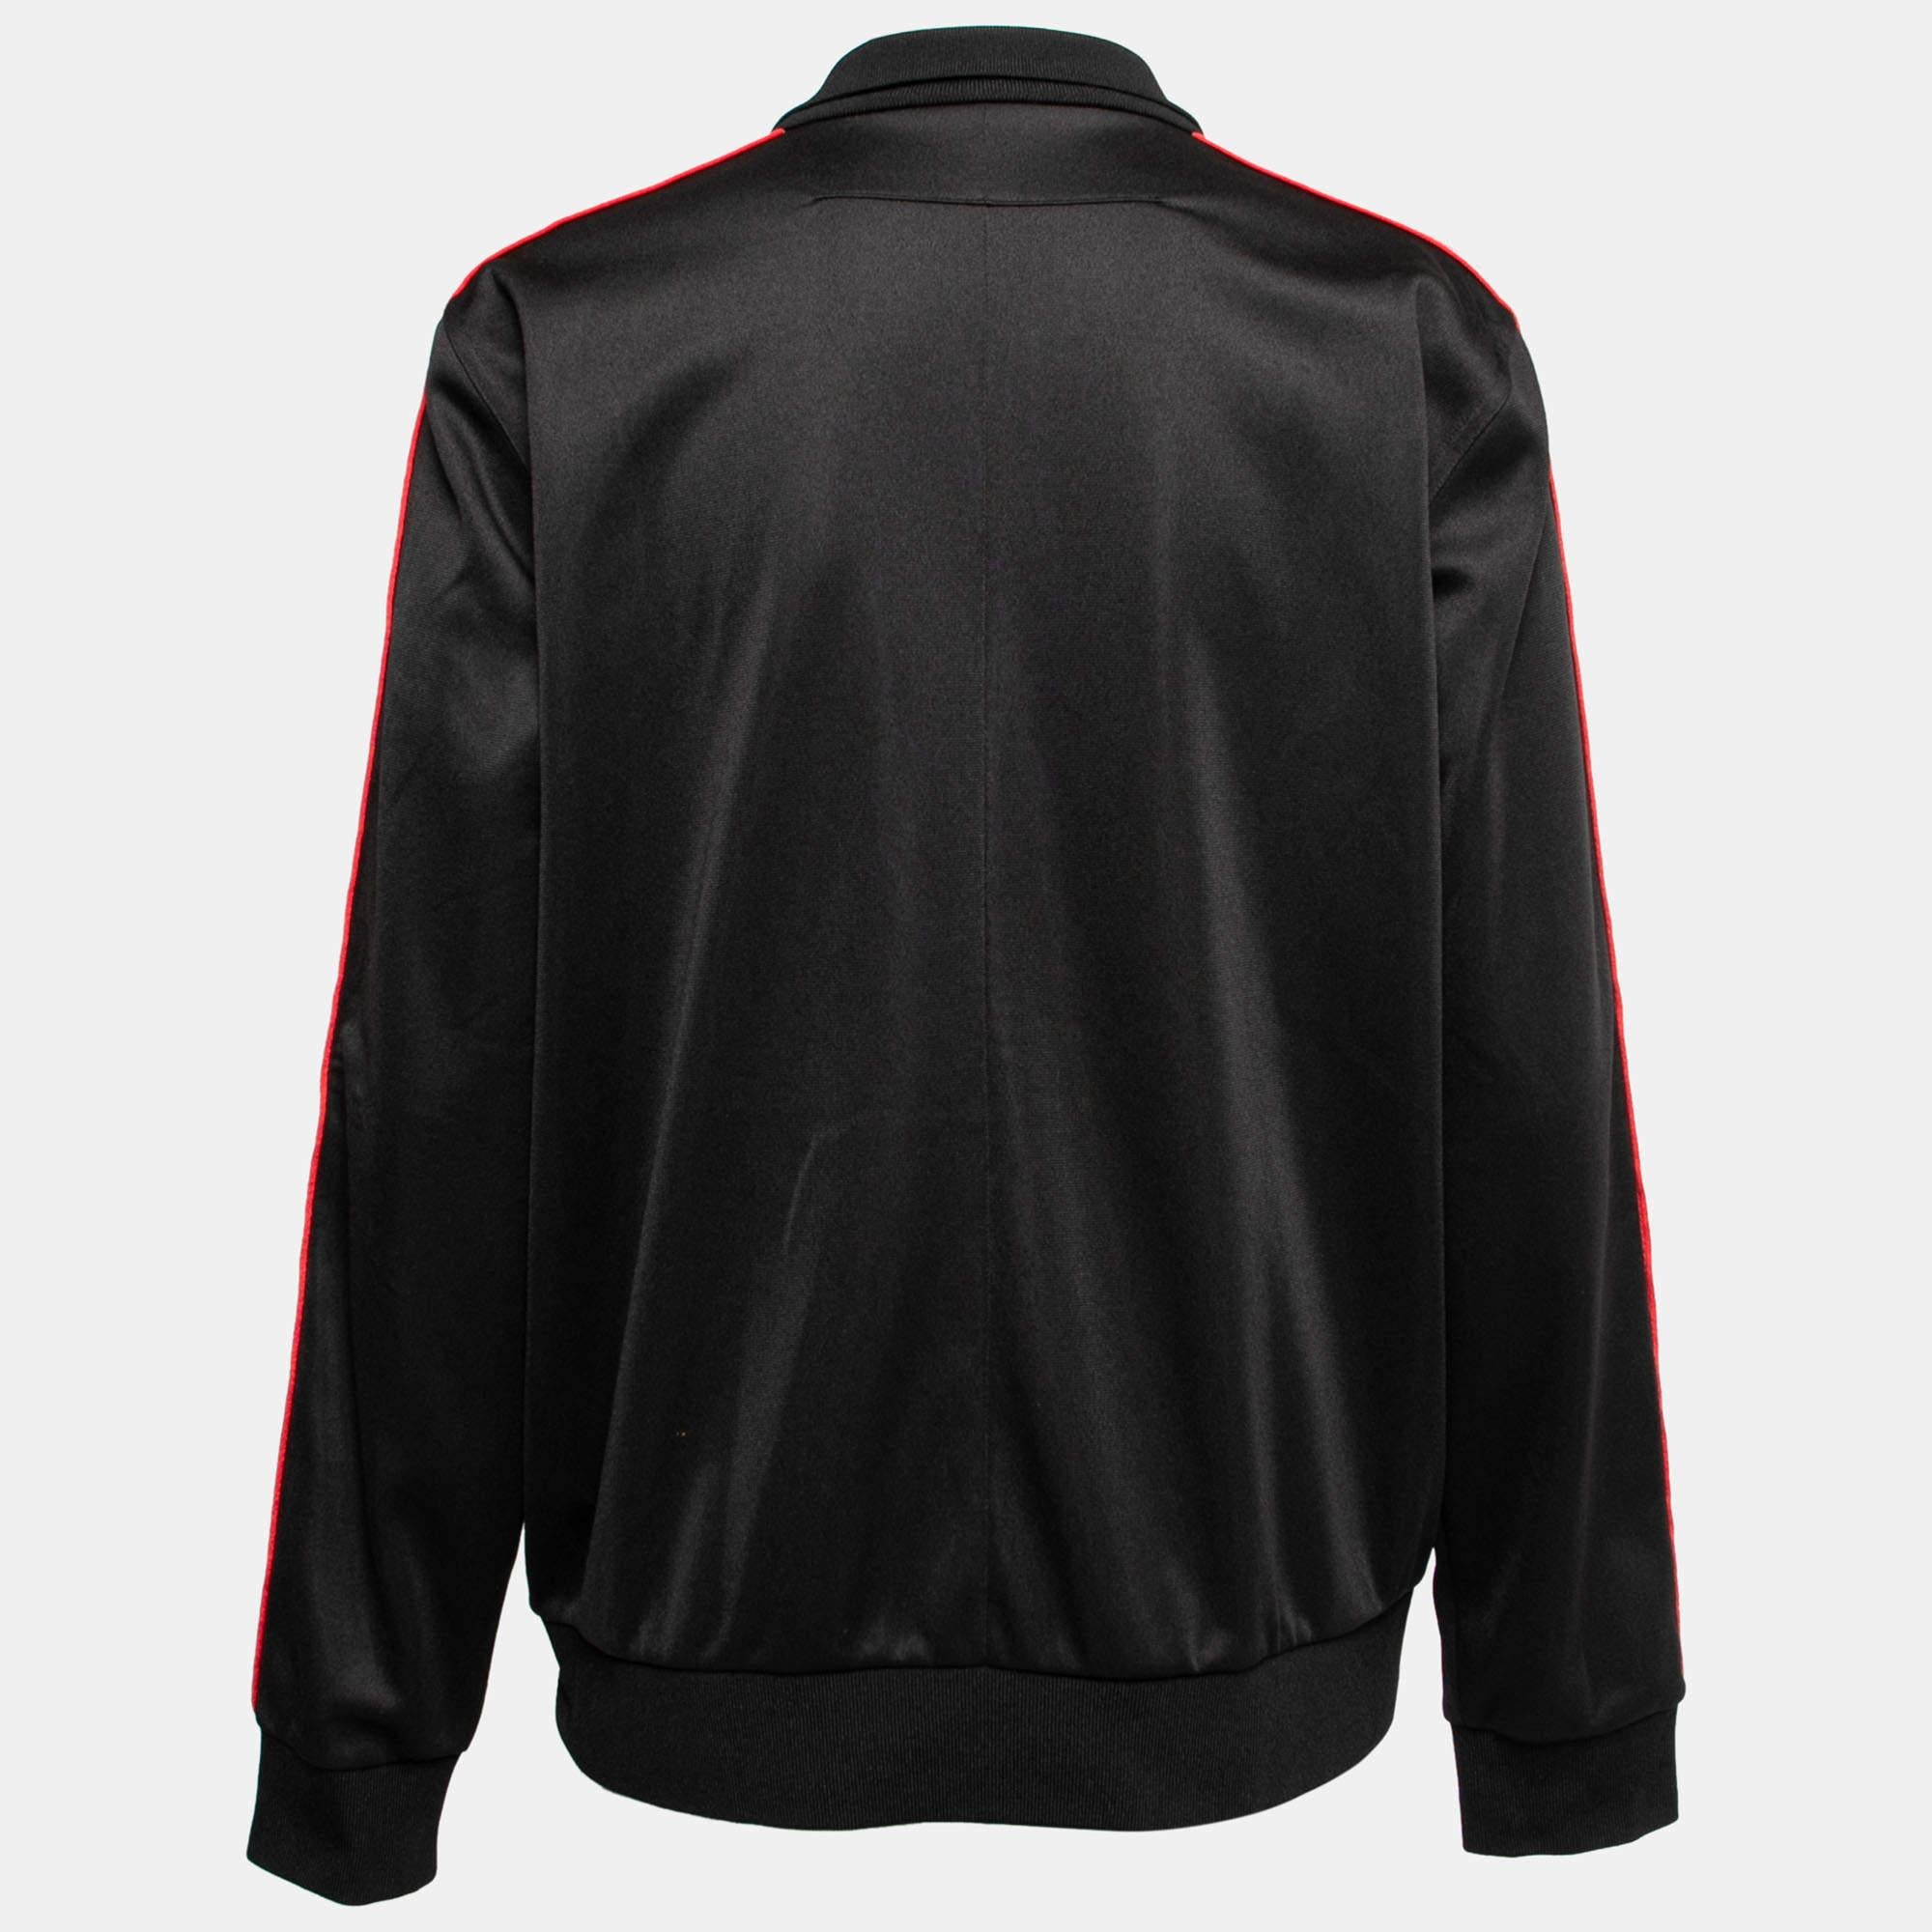 Sport an effortlessly dapper look with this jacket from the House of Givenchy. It is tailored using black jersey fabric, with logo tape trims highlighting its long sleeves. This jacket has a zip-front fastening, collars, and two external pockets.